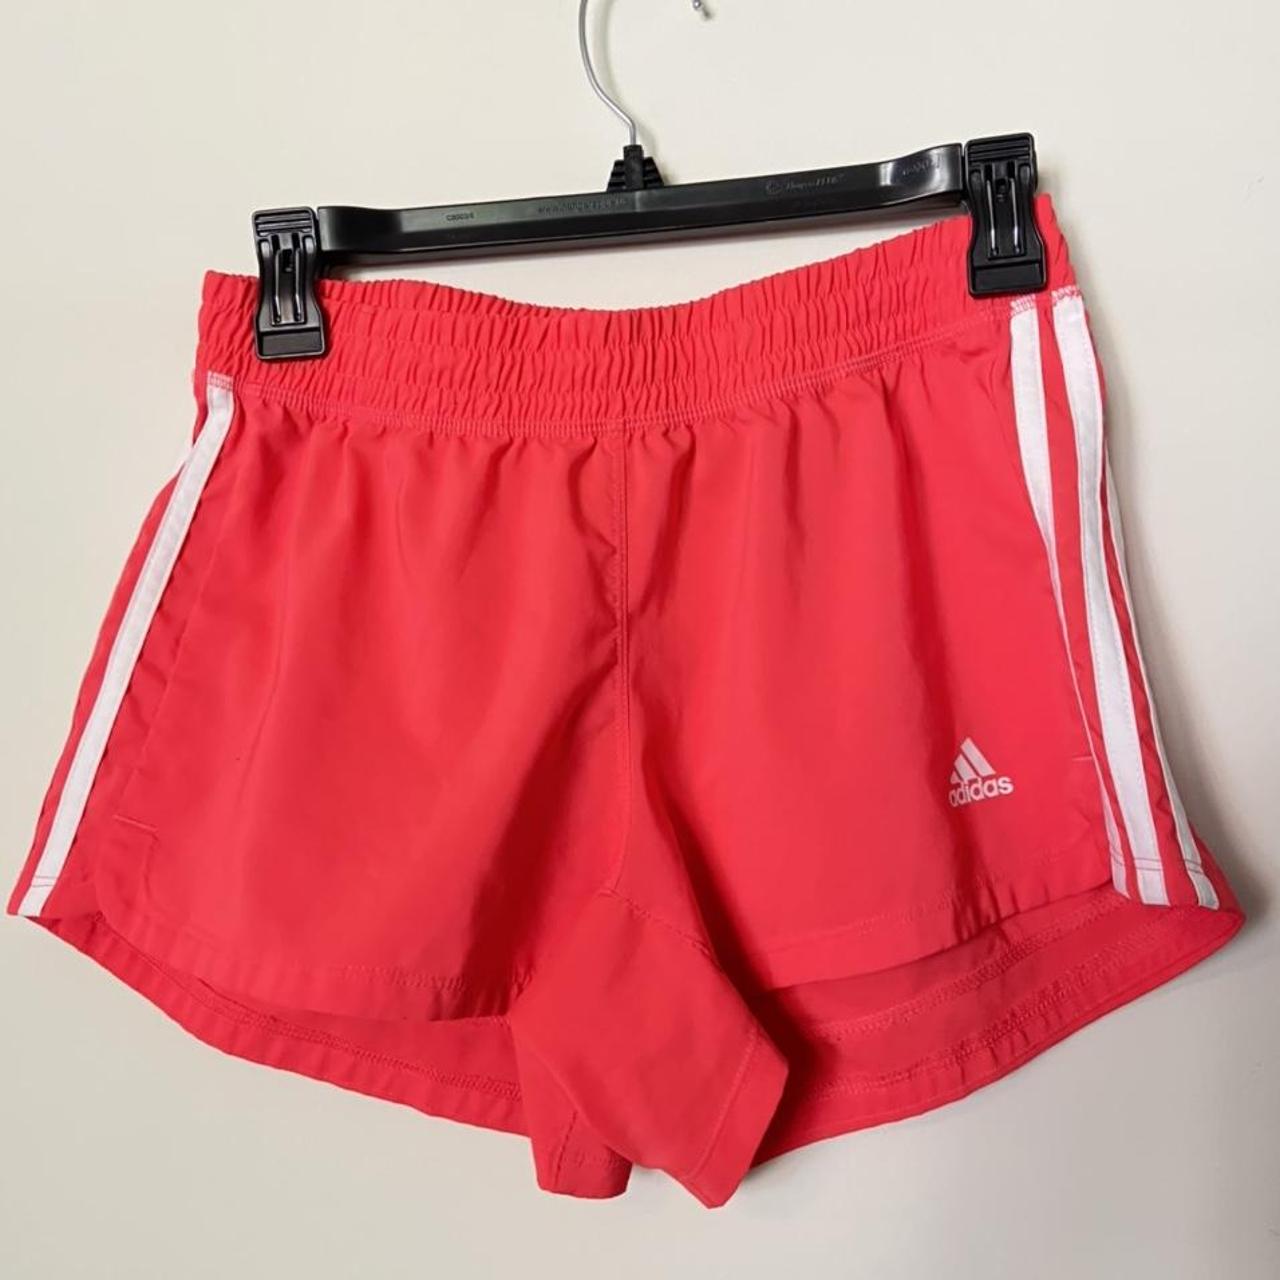 Adidas Women's Pink and White Shorts | Depop